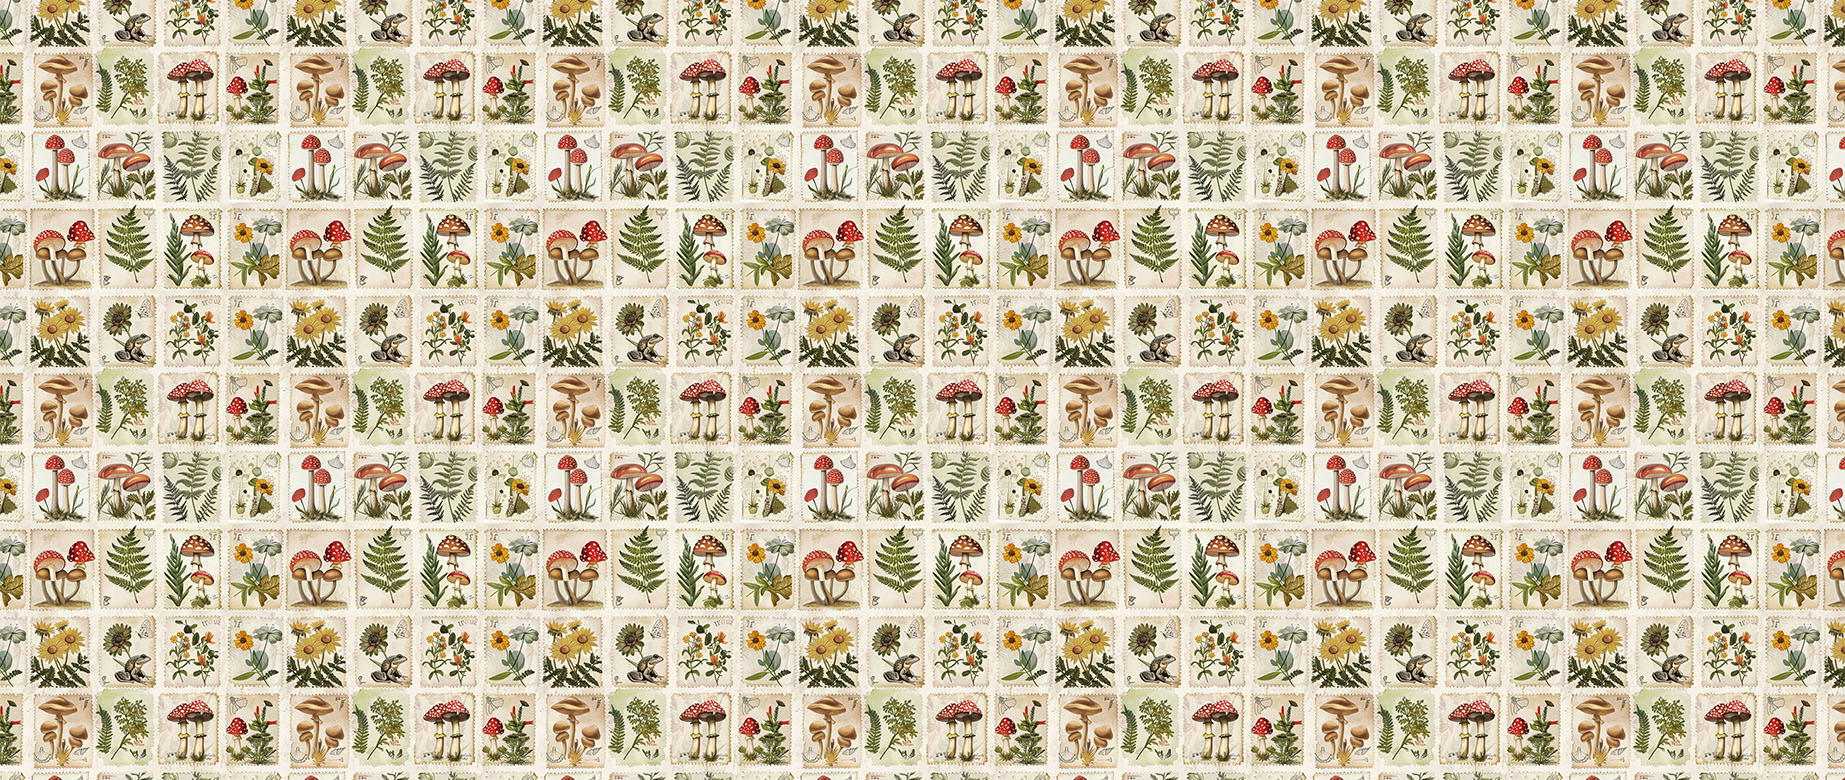 stamp-collage-of-botanical-design-wallpaper-wide-view